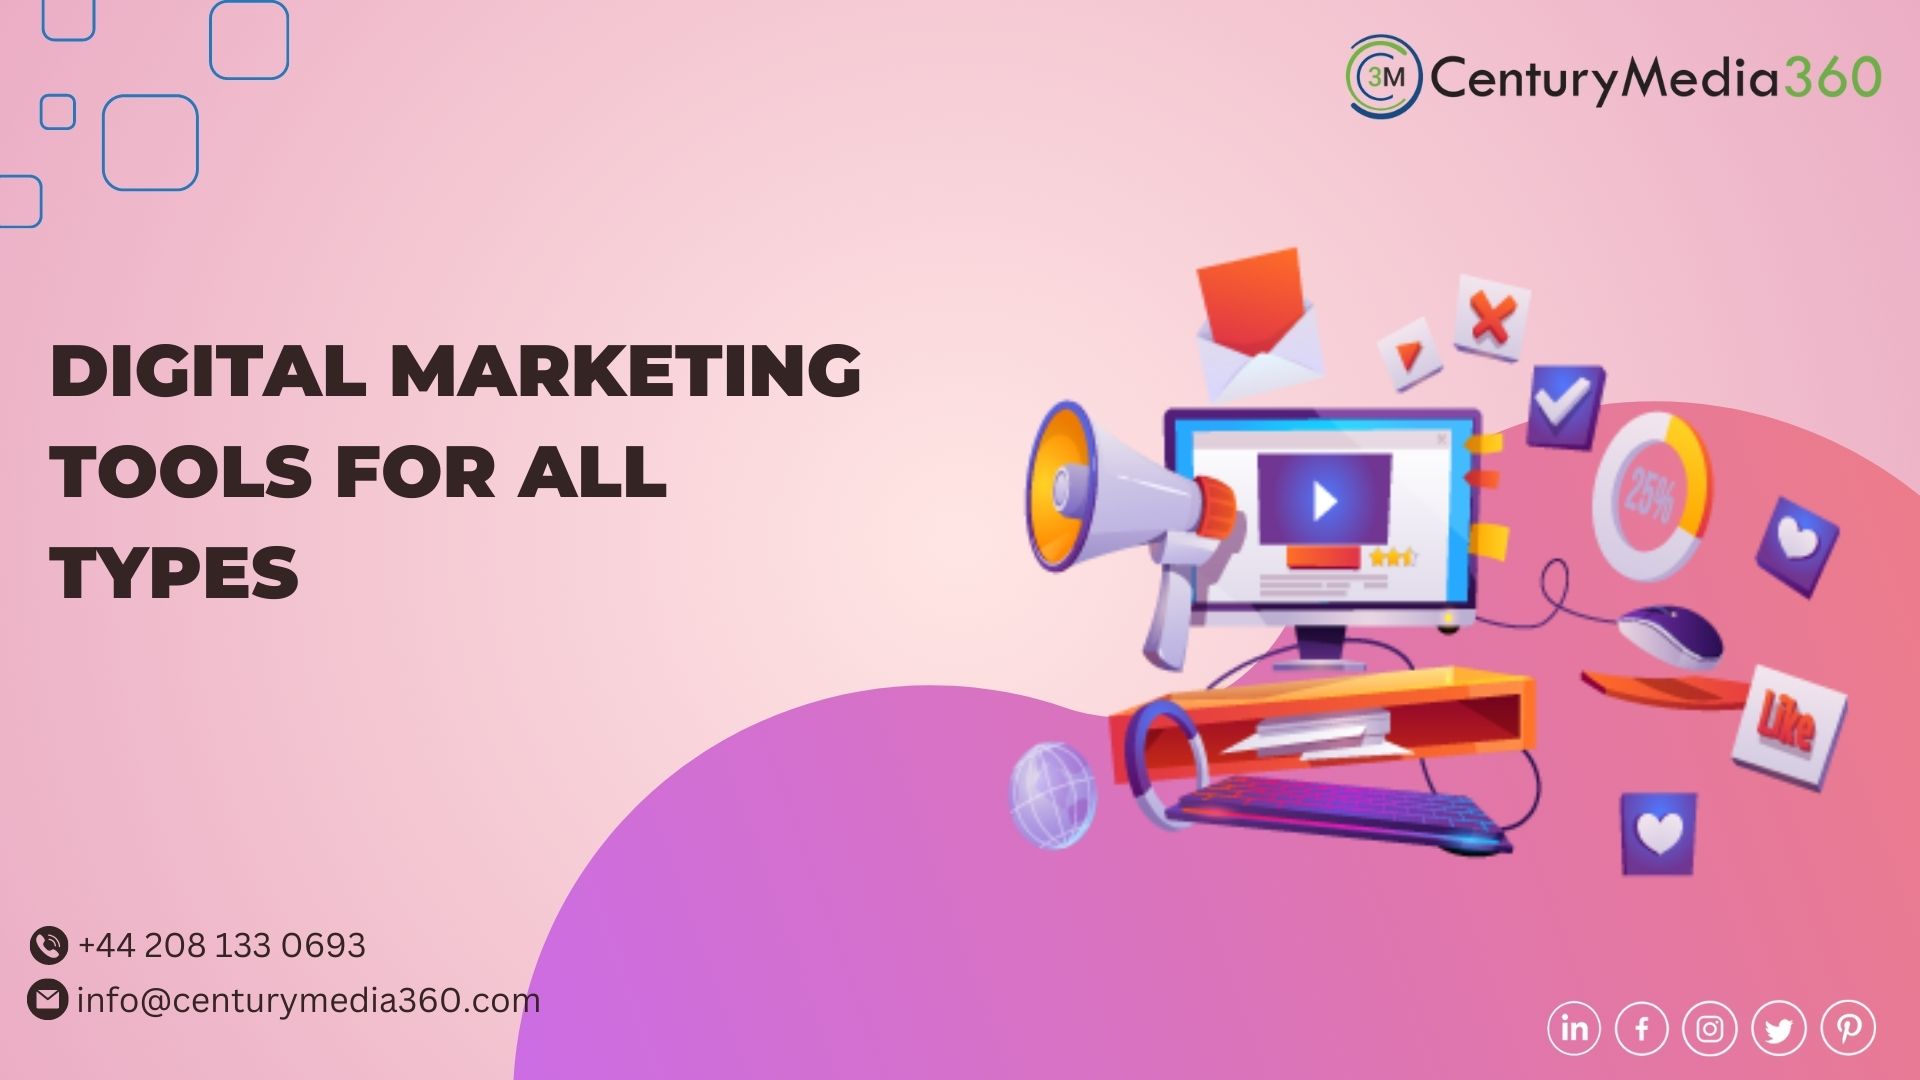 Digital Marketing Tools for All Types